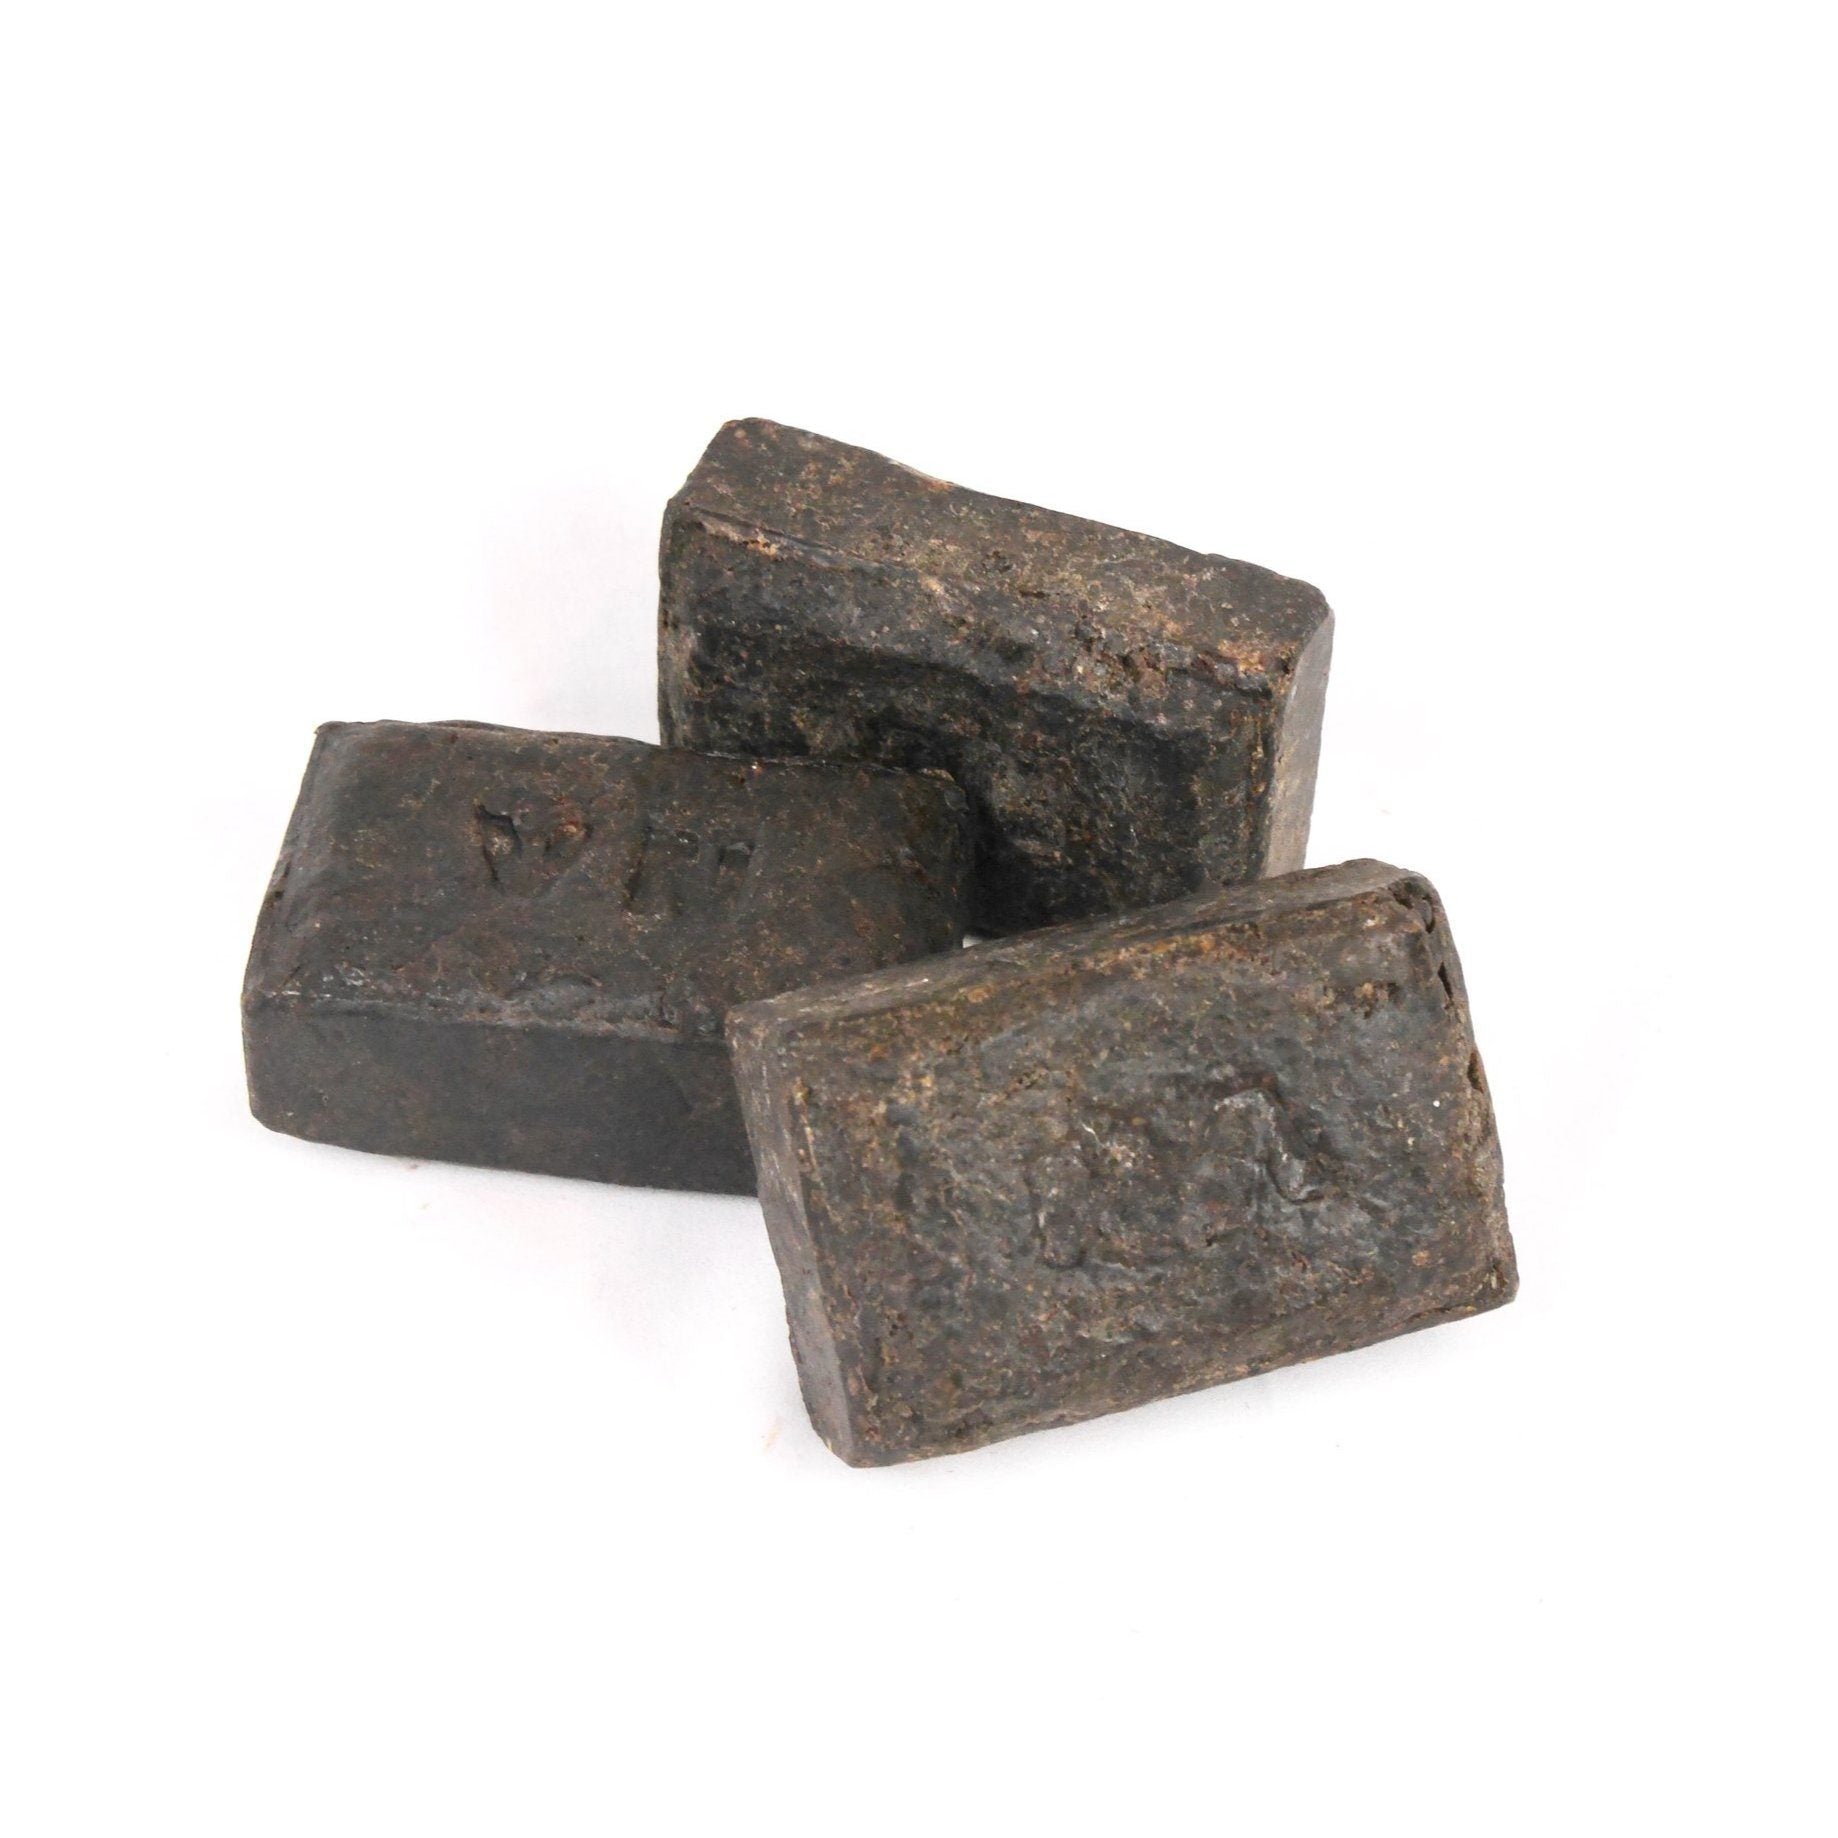 African Black Soap Bath and Body Mamaa Trade large bar 140gr Prettycleanshop